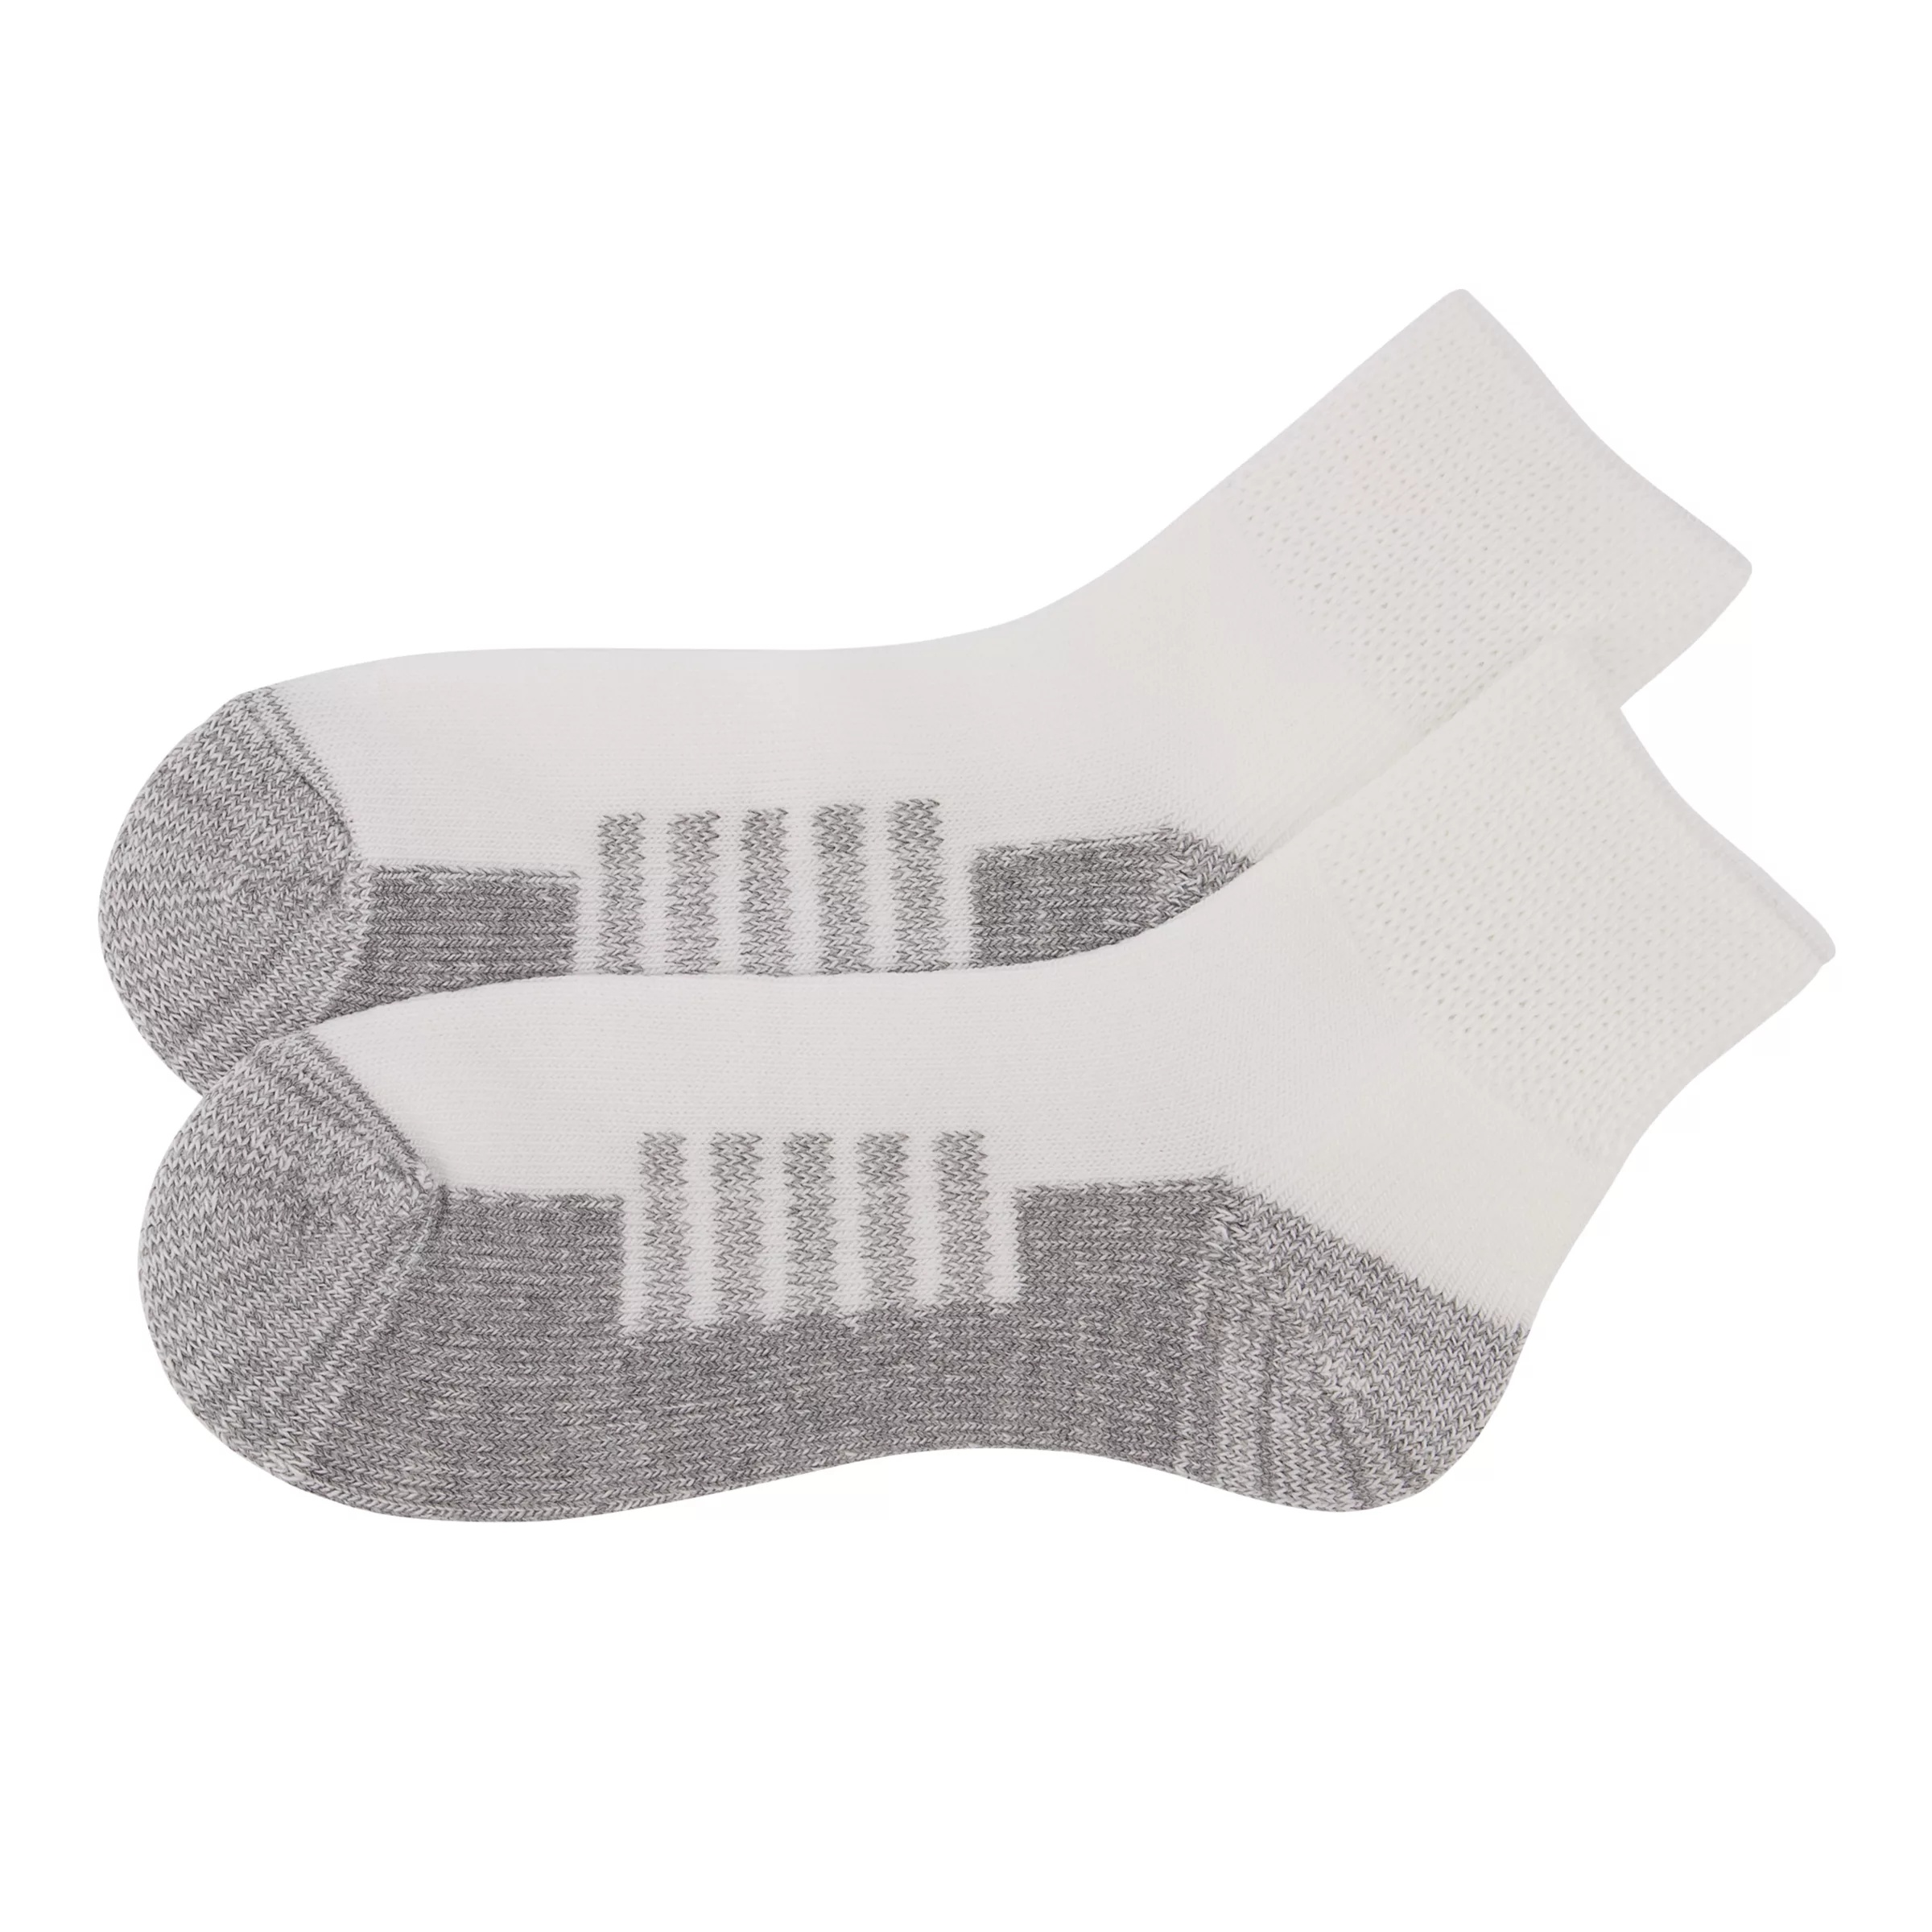 X-Wide Wellness Ankle Sock 1 Pair - 3